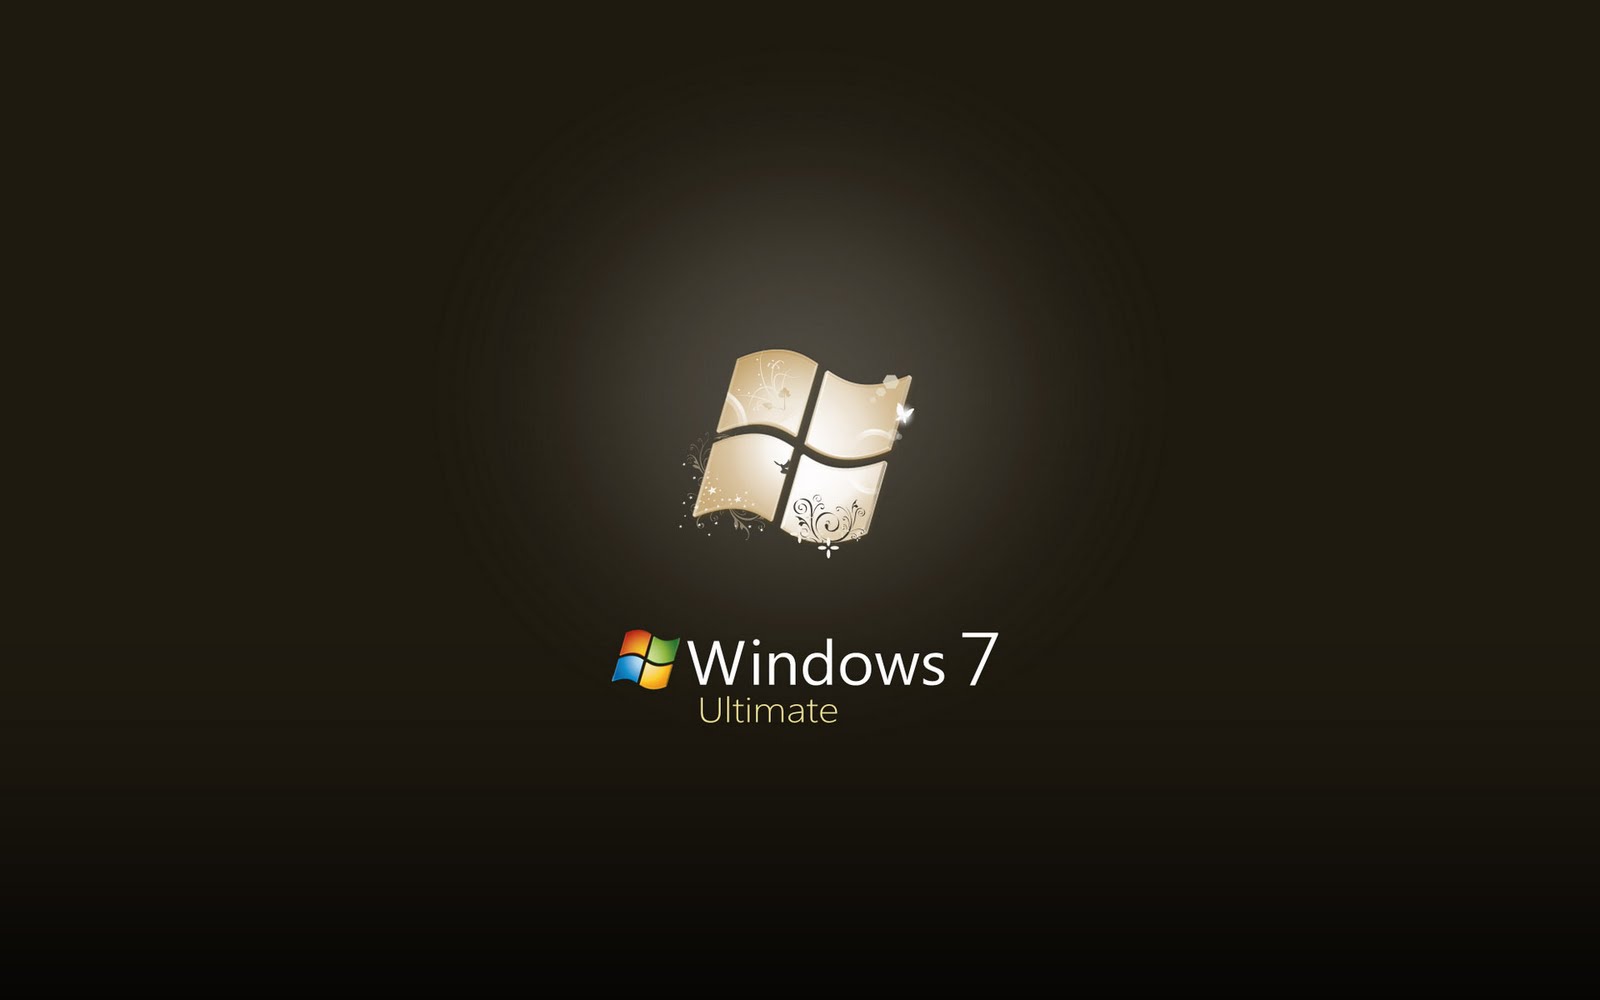 There are 41 Windows 7 and Ubuntu's Beautiful Wallpapers in this post